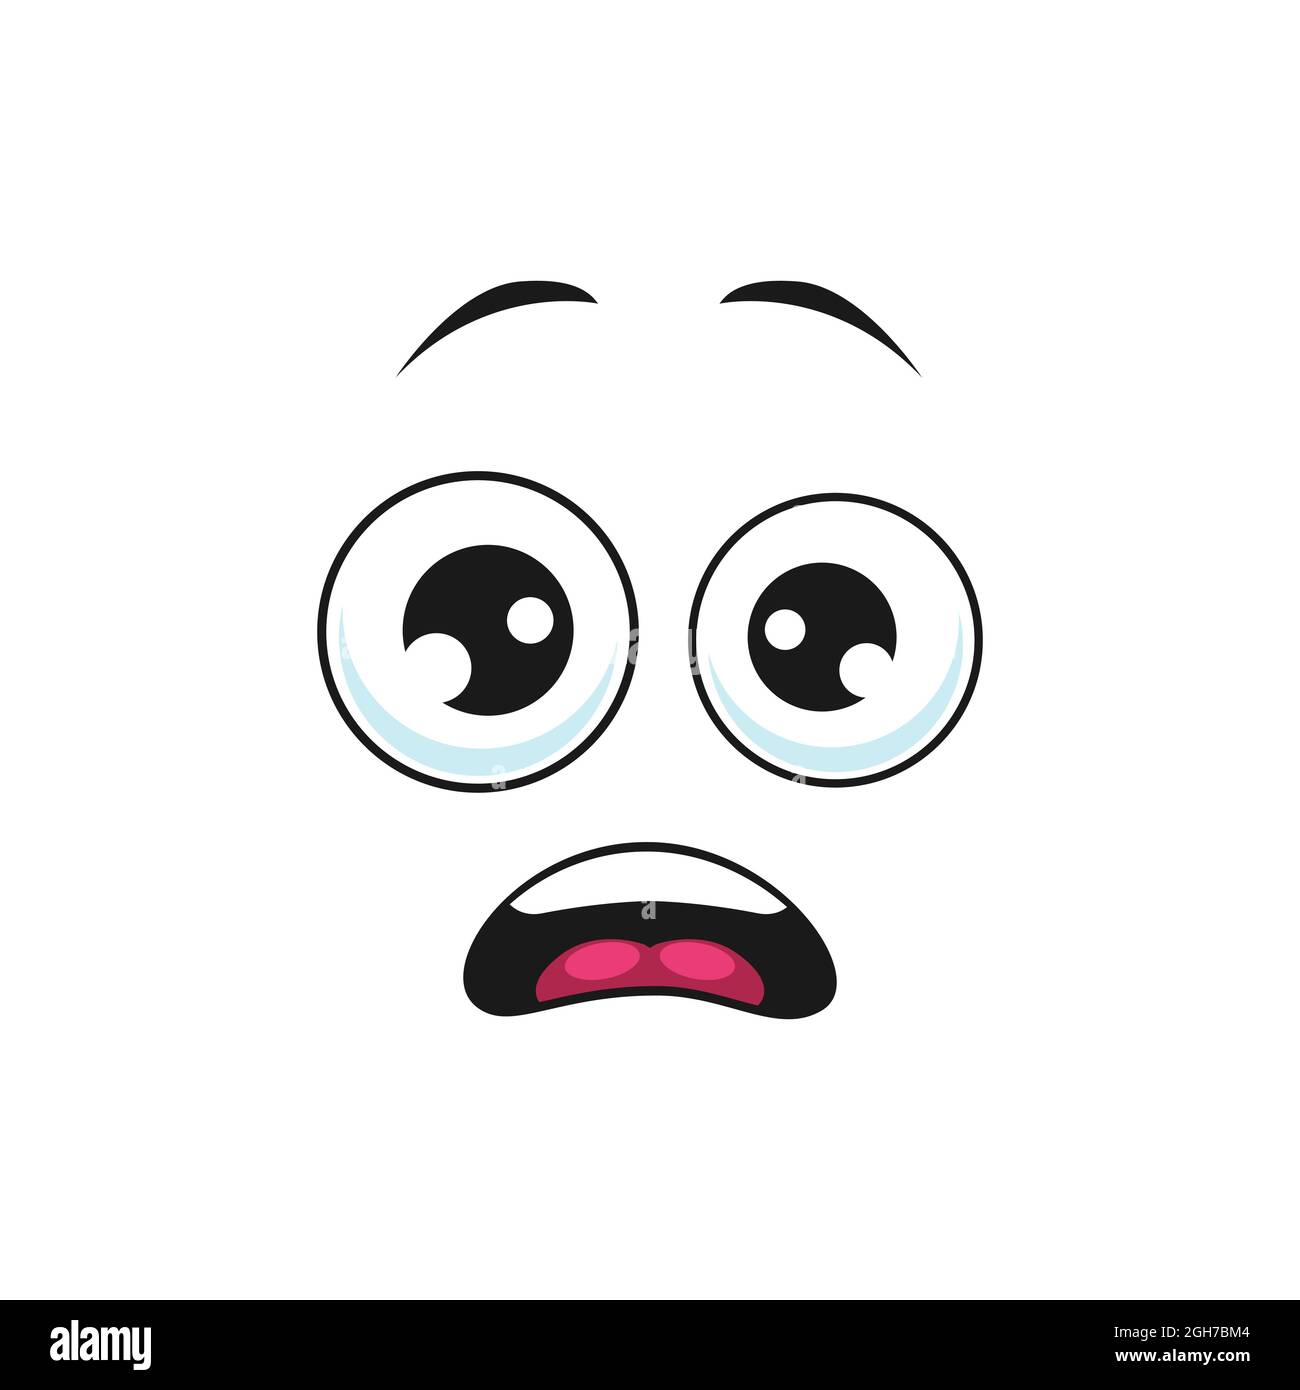 Cartoon face vector icon, surprised, frightened or worry emoji